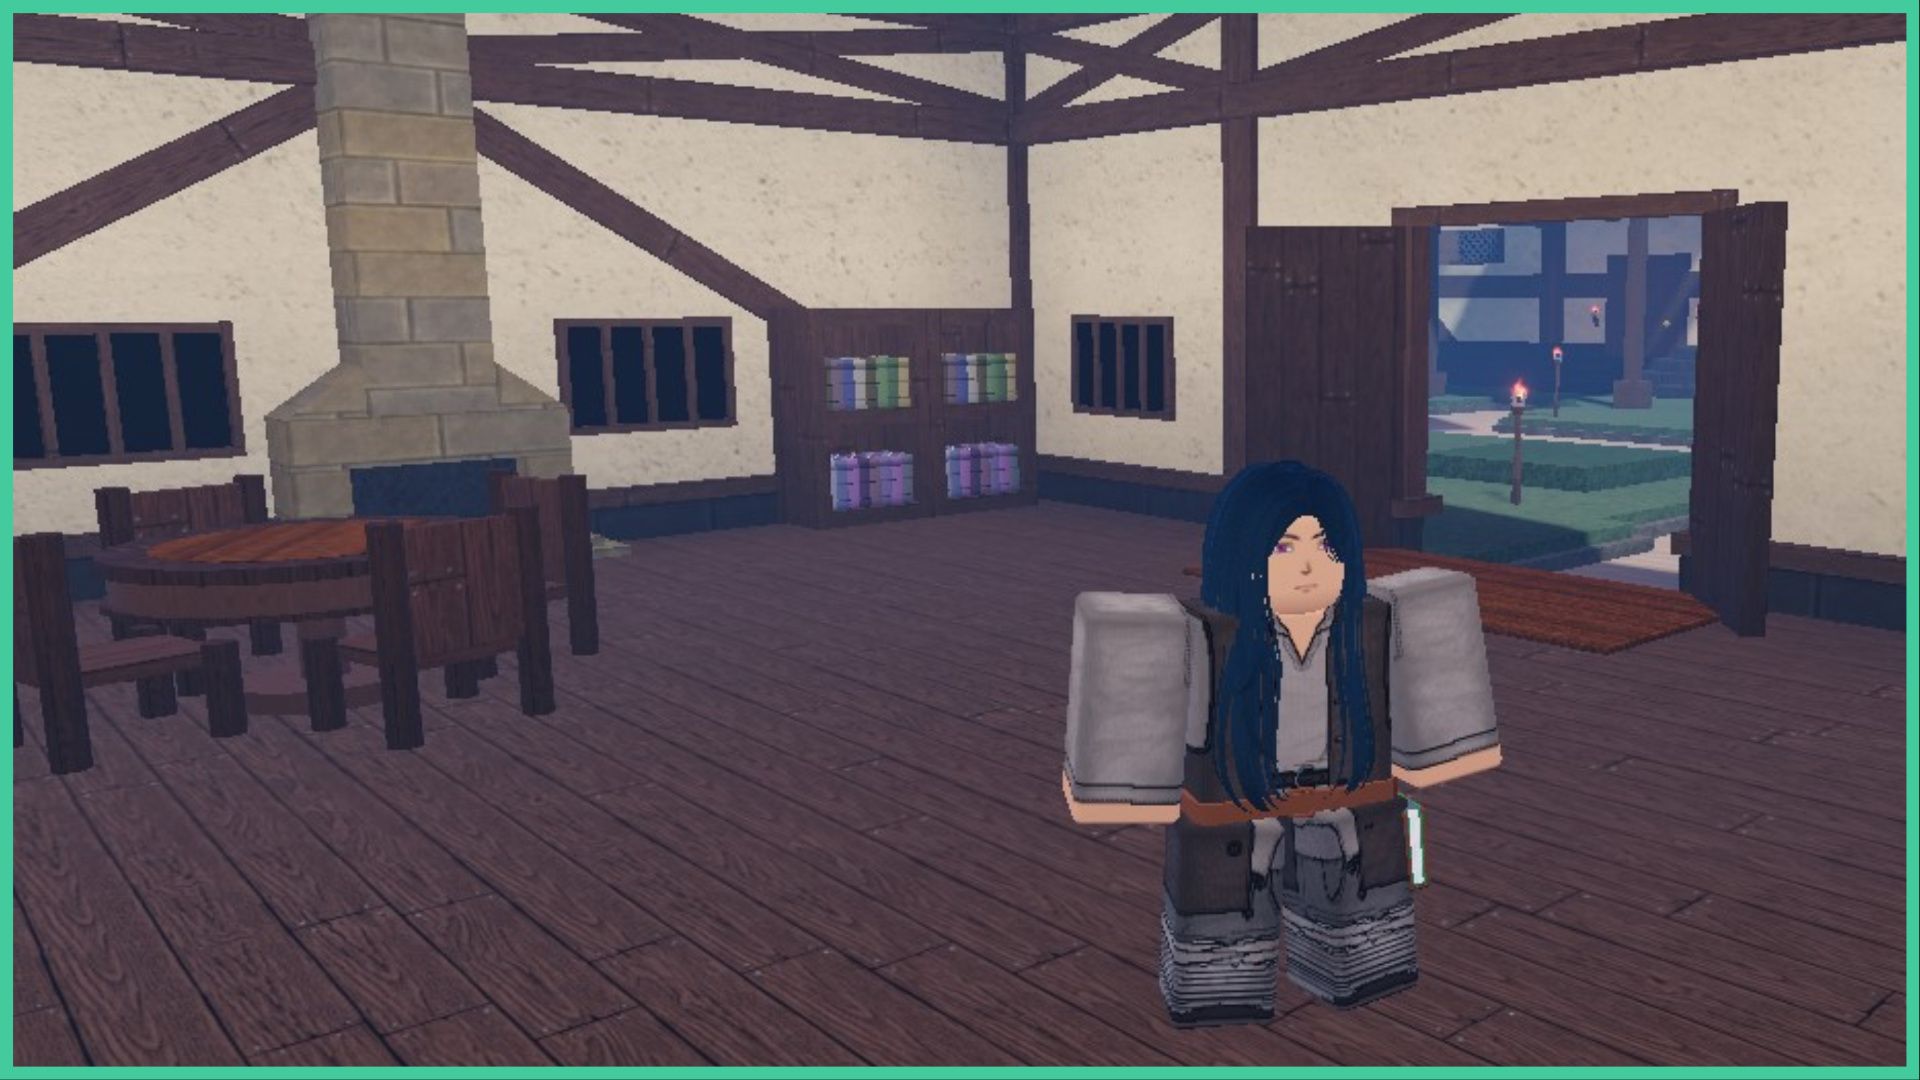 feature image for our clover retribution tier list, the image features a screenshot from the start of the game, of a roblox character in the starter outfit standing in their house, filled with wooden beams to support the walls and ceiling, wooden floorboards, a fireplace, and a wooden table and chairs